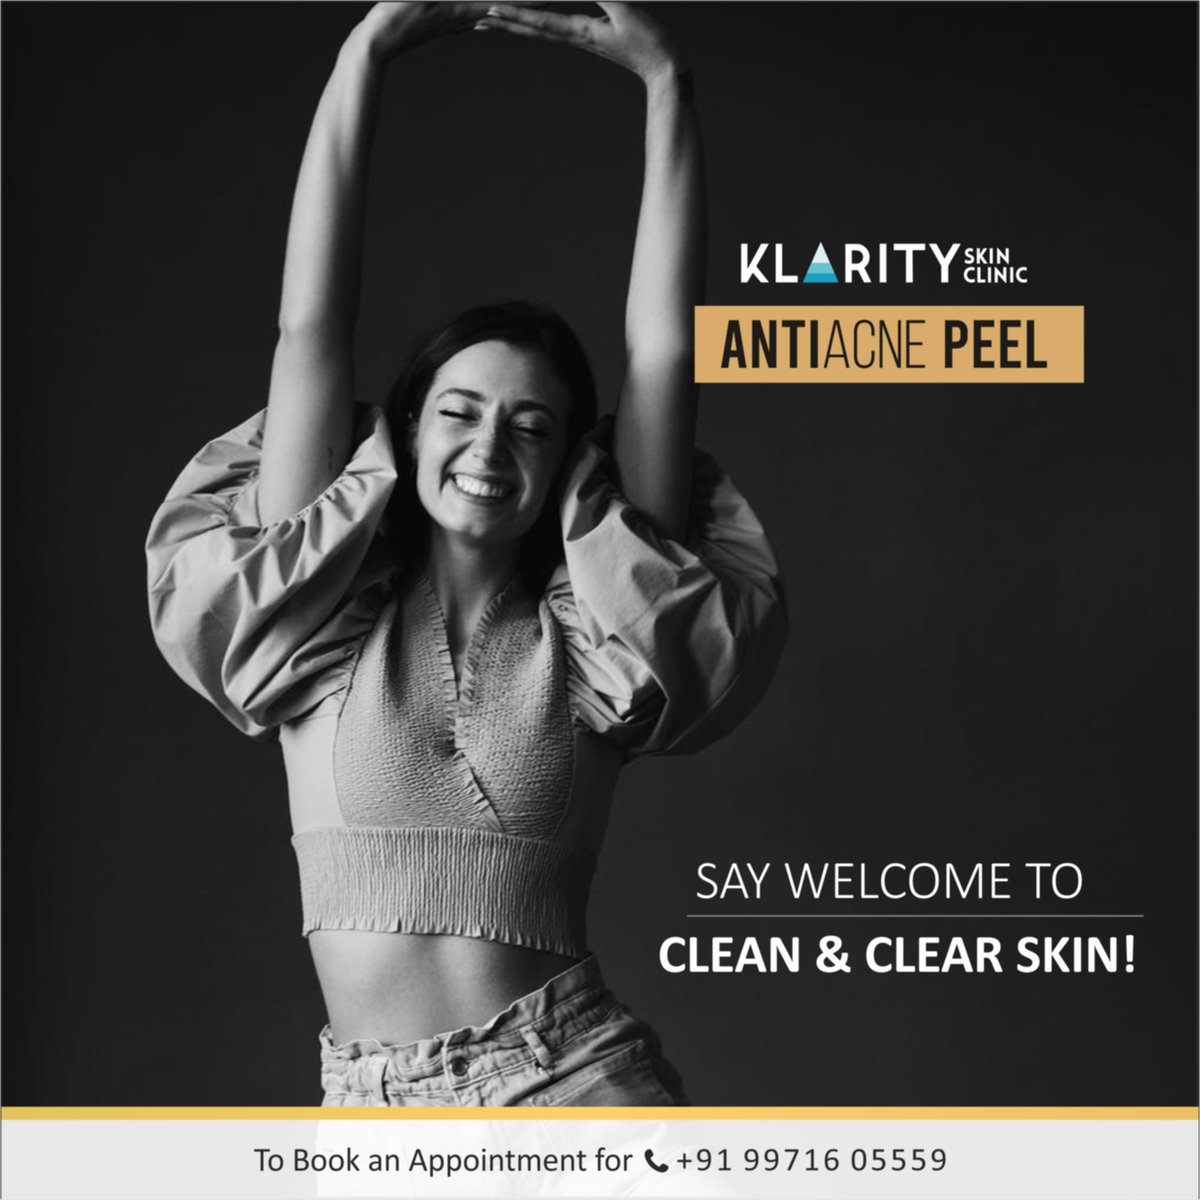 A clear skin gives you the confidence to face the world. A clear skin is the sign of good health and happiness. Show your best self with a clear, glowing skin!
To Book an Appointment,
Call +91 99716 05559
#antiacneskincare #ClearSkinGoals #glowingskintips #AcneProneSkin #gk2